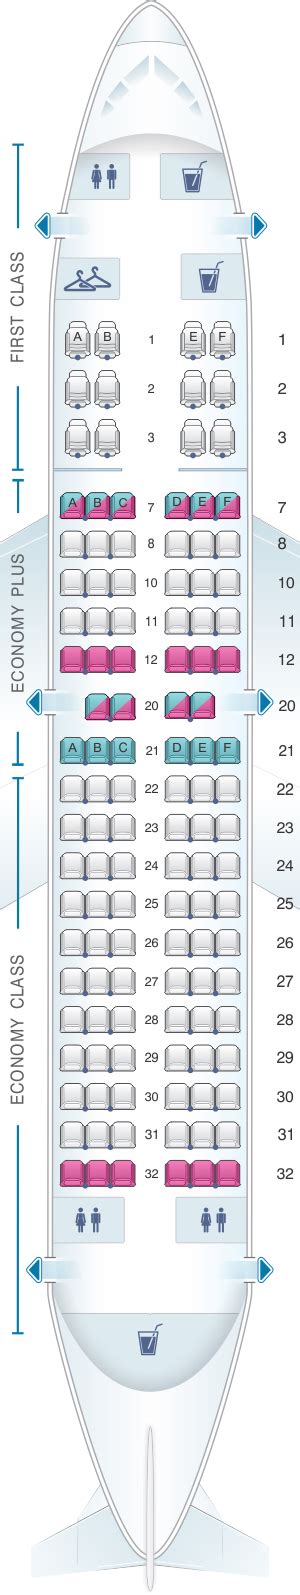 United 737 700 seat map. United Airlines added the Boeing 737 MAX 9 to their fleet in 2018. The aircraft is configured with First, Economy Plus and Economy Class seating. The standard seats in Economy feature a redesign of the back literature pocket and tray table to provide additional legspace. The seats also contain a tablet/personal device holder positioned at a ... 